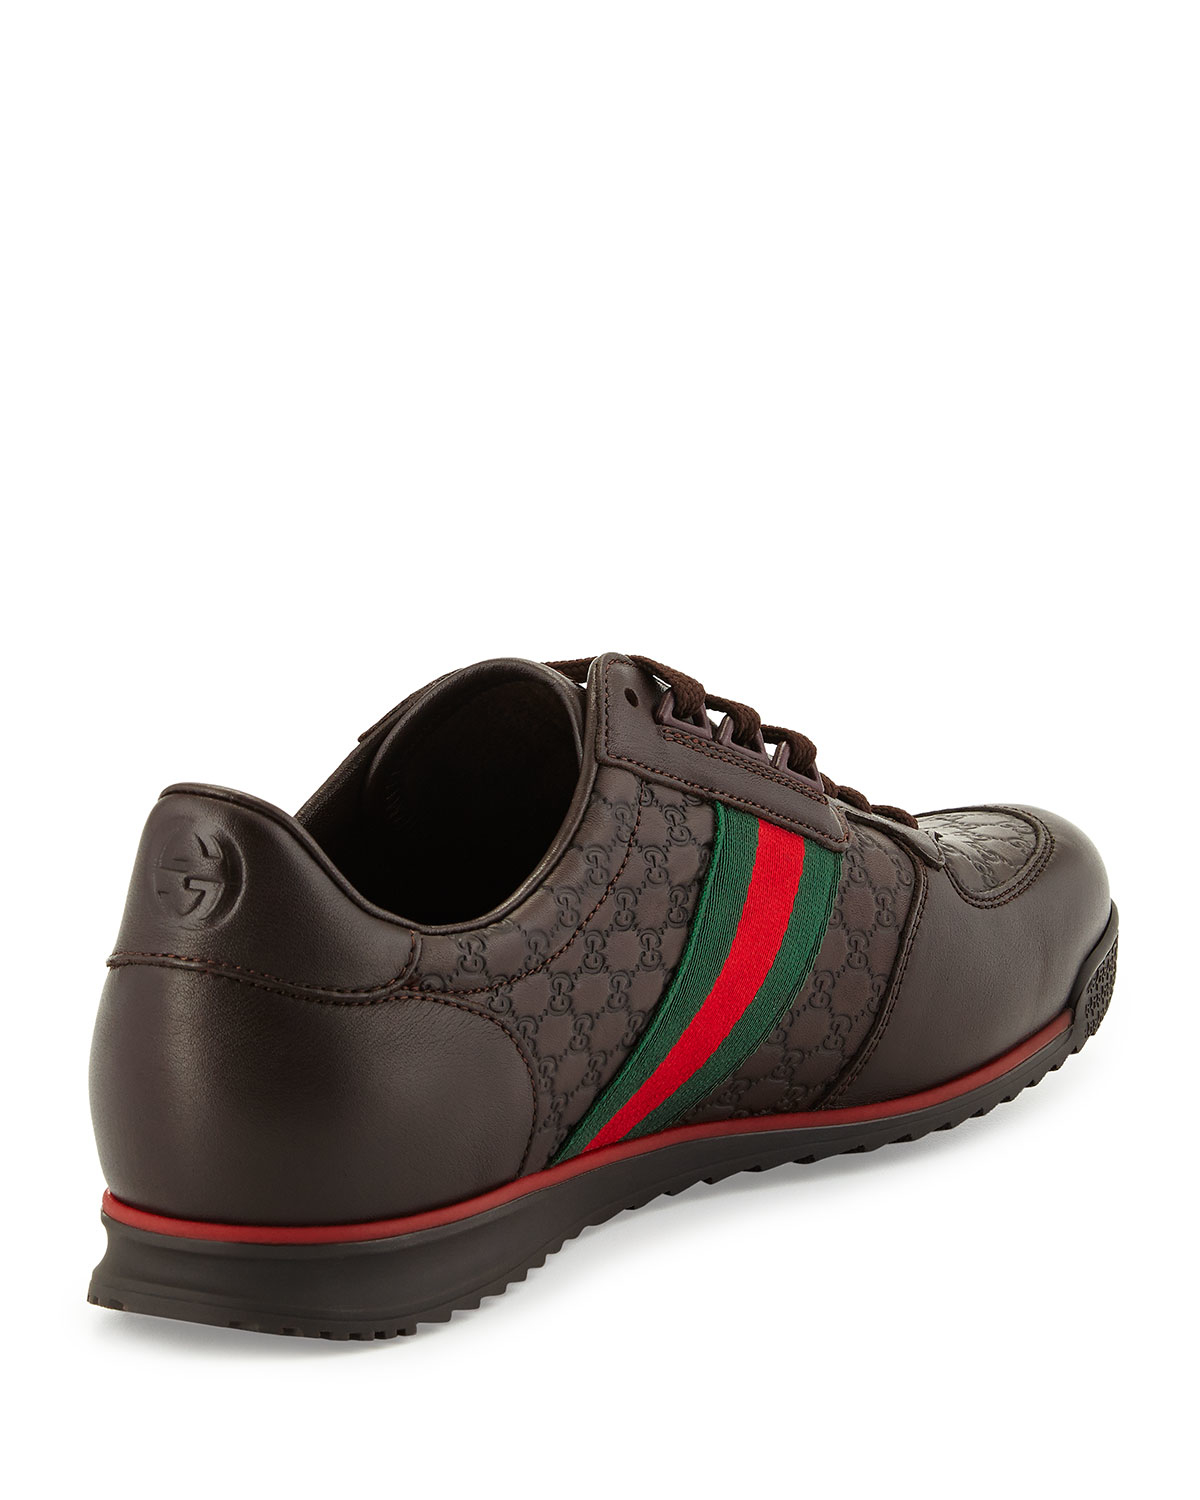 Gucci Low-Top Webbed Sneakers in Brown for Men - Lyst